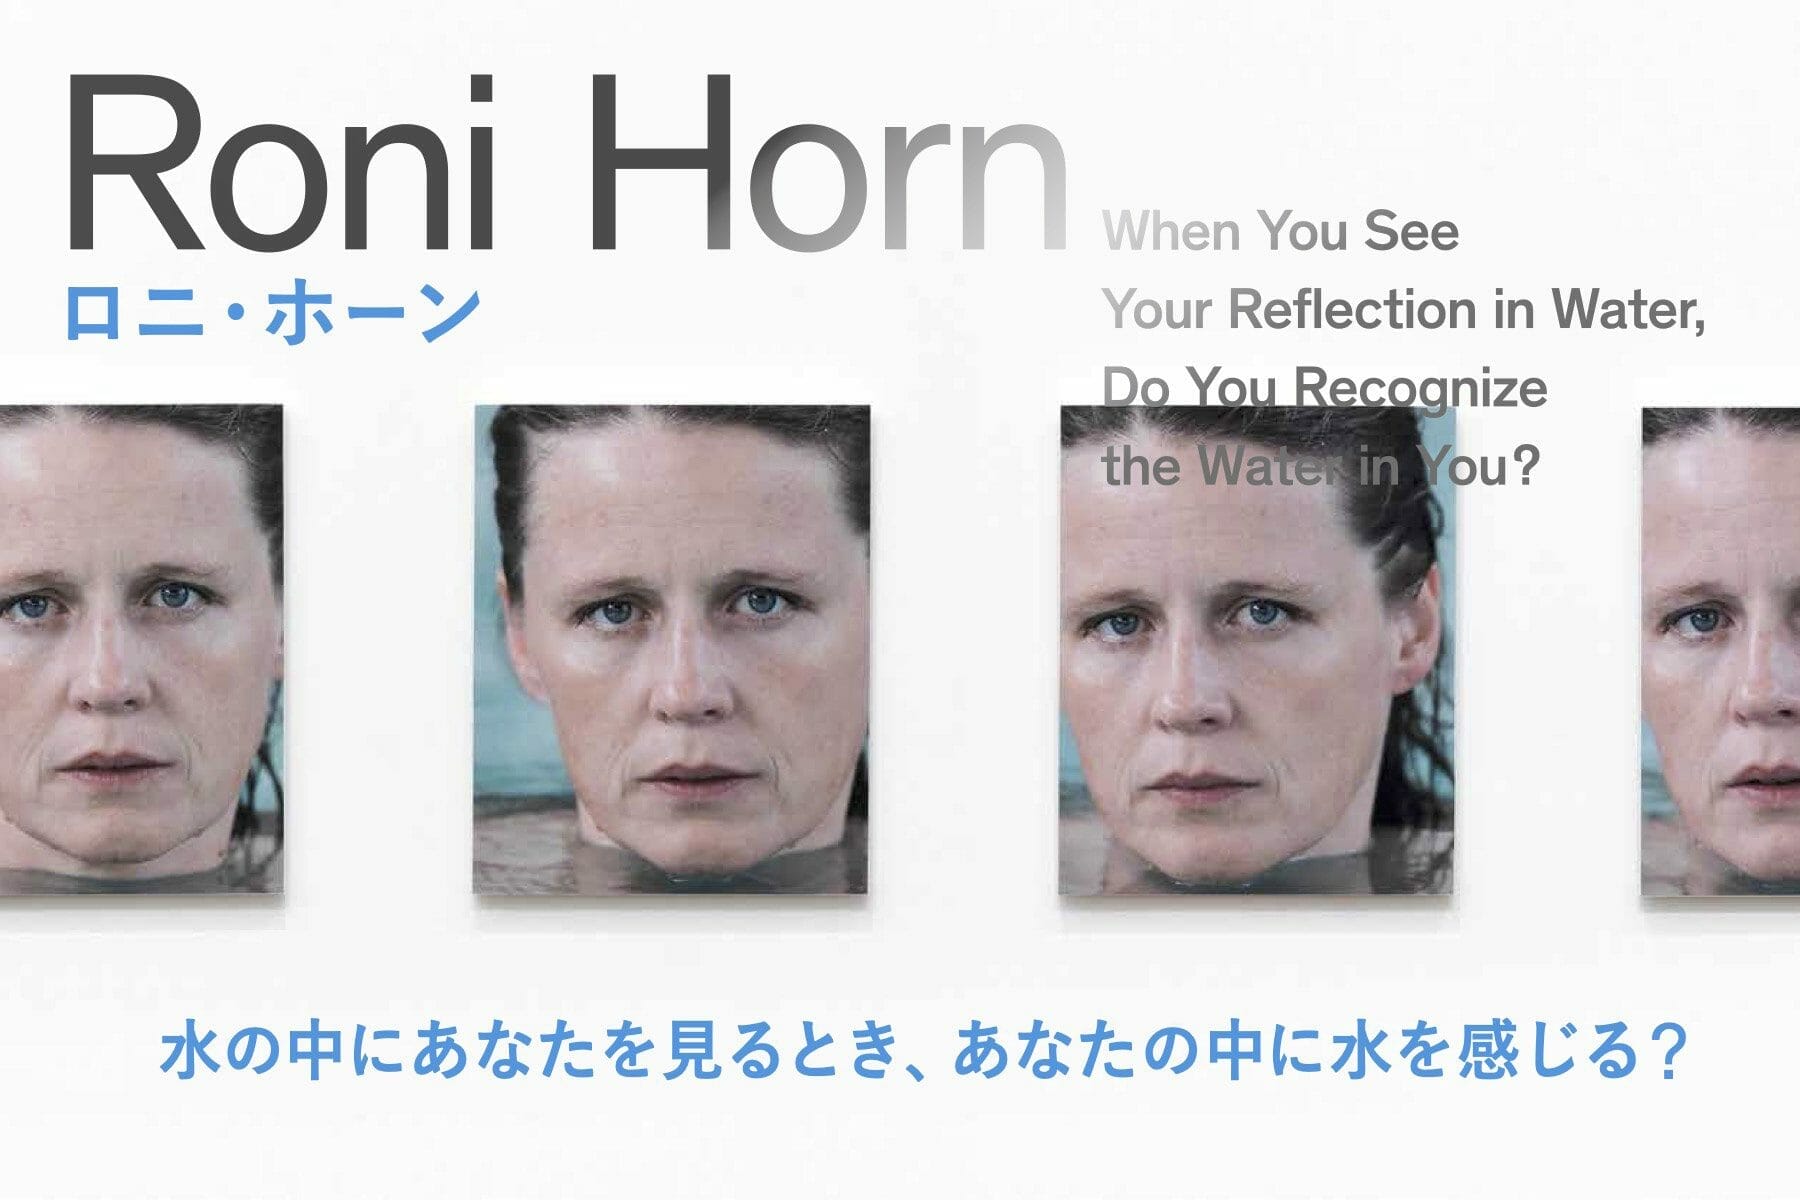 Roni Horn: When You See Your Reflection in Water, Do You Recognize the Water in You? 18 September 2021 – 30 March 2022 Pola Museum of Art, Hakone, Japan